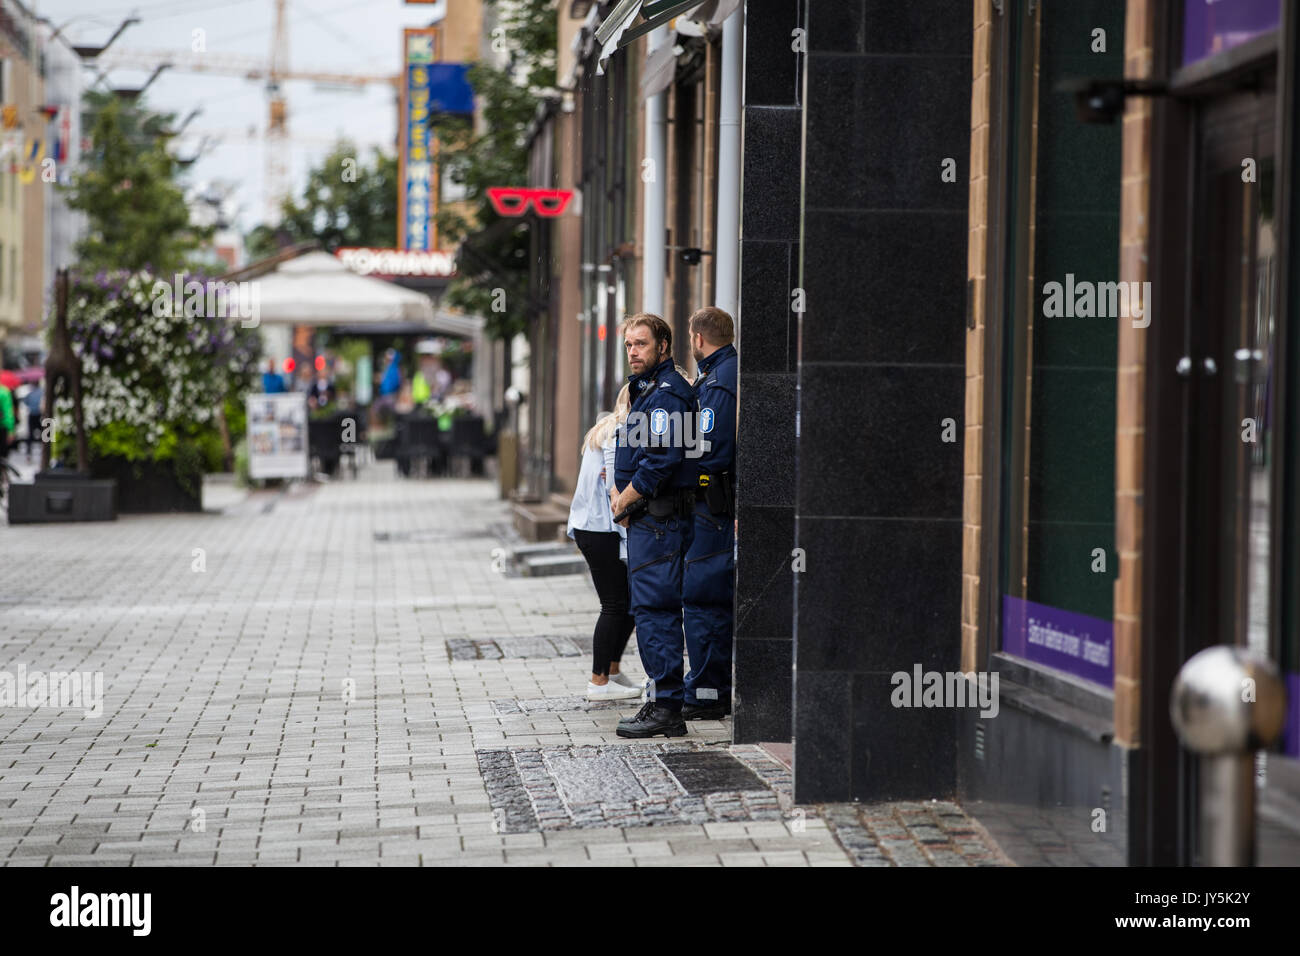 Turku, Finland. 18th of August 2017. Police guarding the area at Yliopistonkatu in Central Turku. Two people have been killed and six others wounded in a knife attack at Turku market square and Puutori. The police was able to stop the attacker within minutes after the first emergency call by shooting him at thigh. Credit: Jarmo Piironen/Alamy Live News Stock Photo